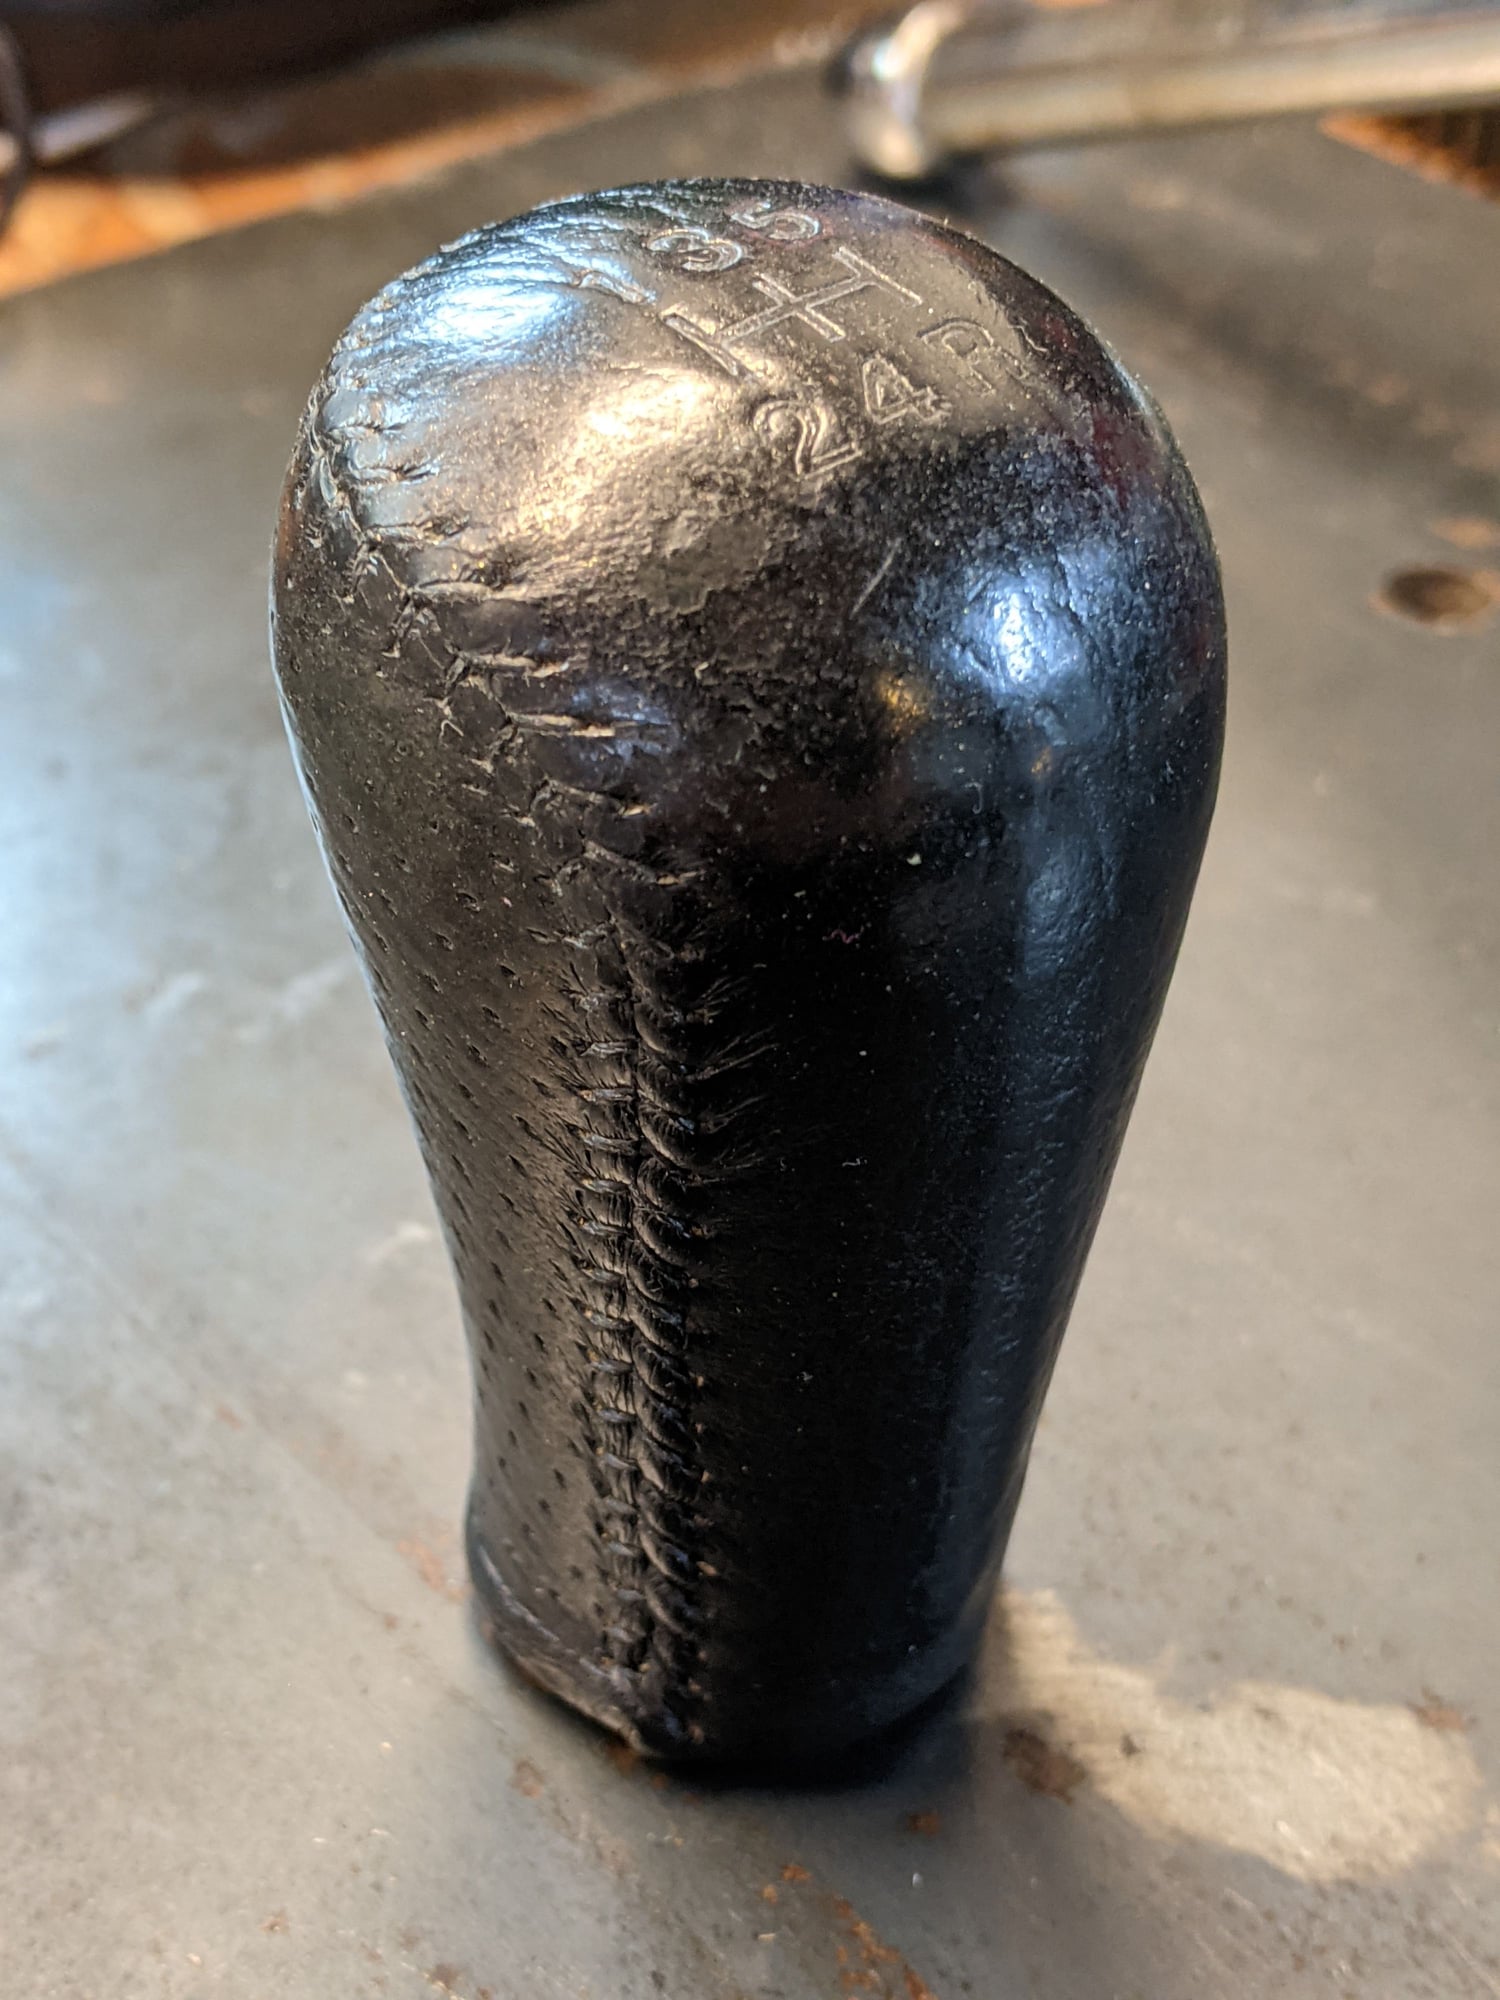 Interior/Upholstery - OEM Shift knobs (used) and Sakebomb Stainless clutch line (new) - Used - 1993 to 2002 Mazda RX-7 - Bay Area, CA 94080, United States